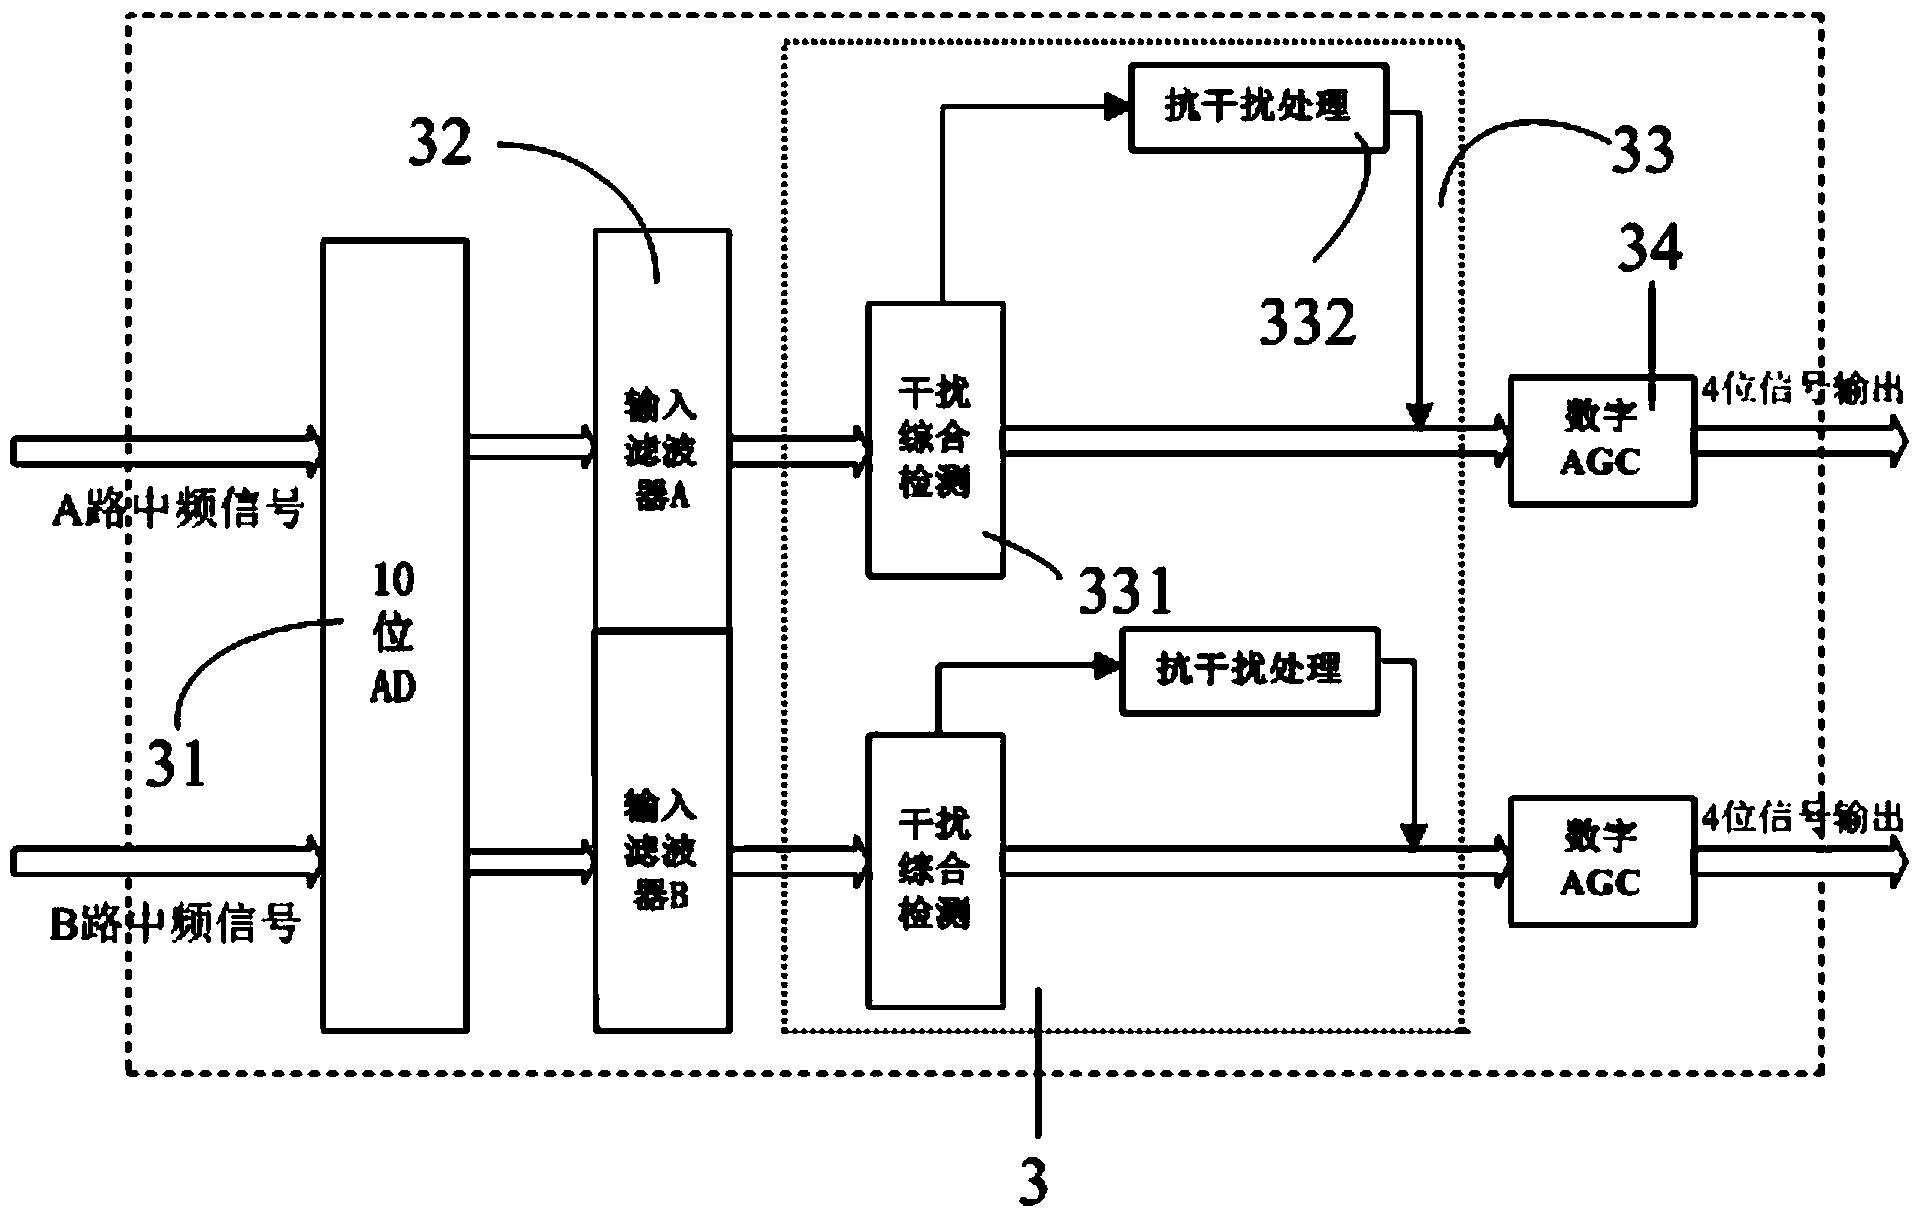 Anti-interference A/D (analog-to-digital) chip for Compass satellite navigation